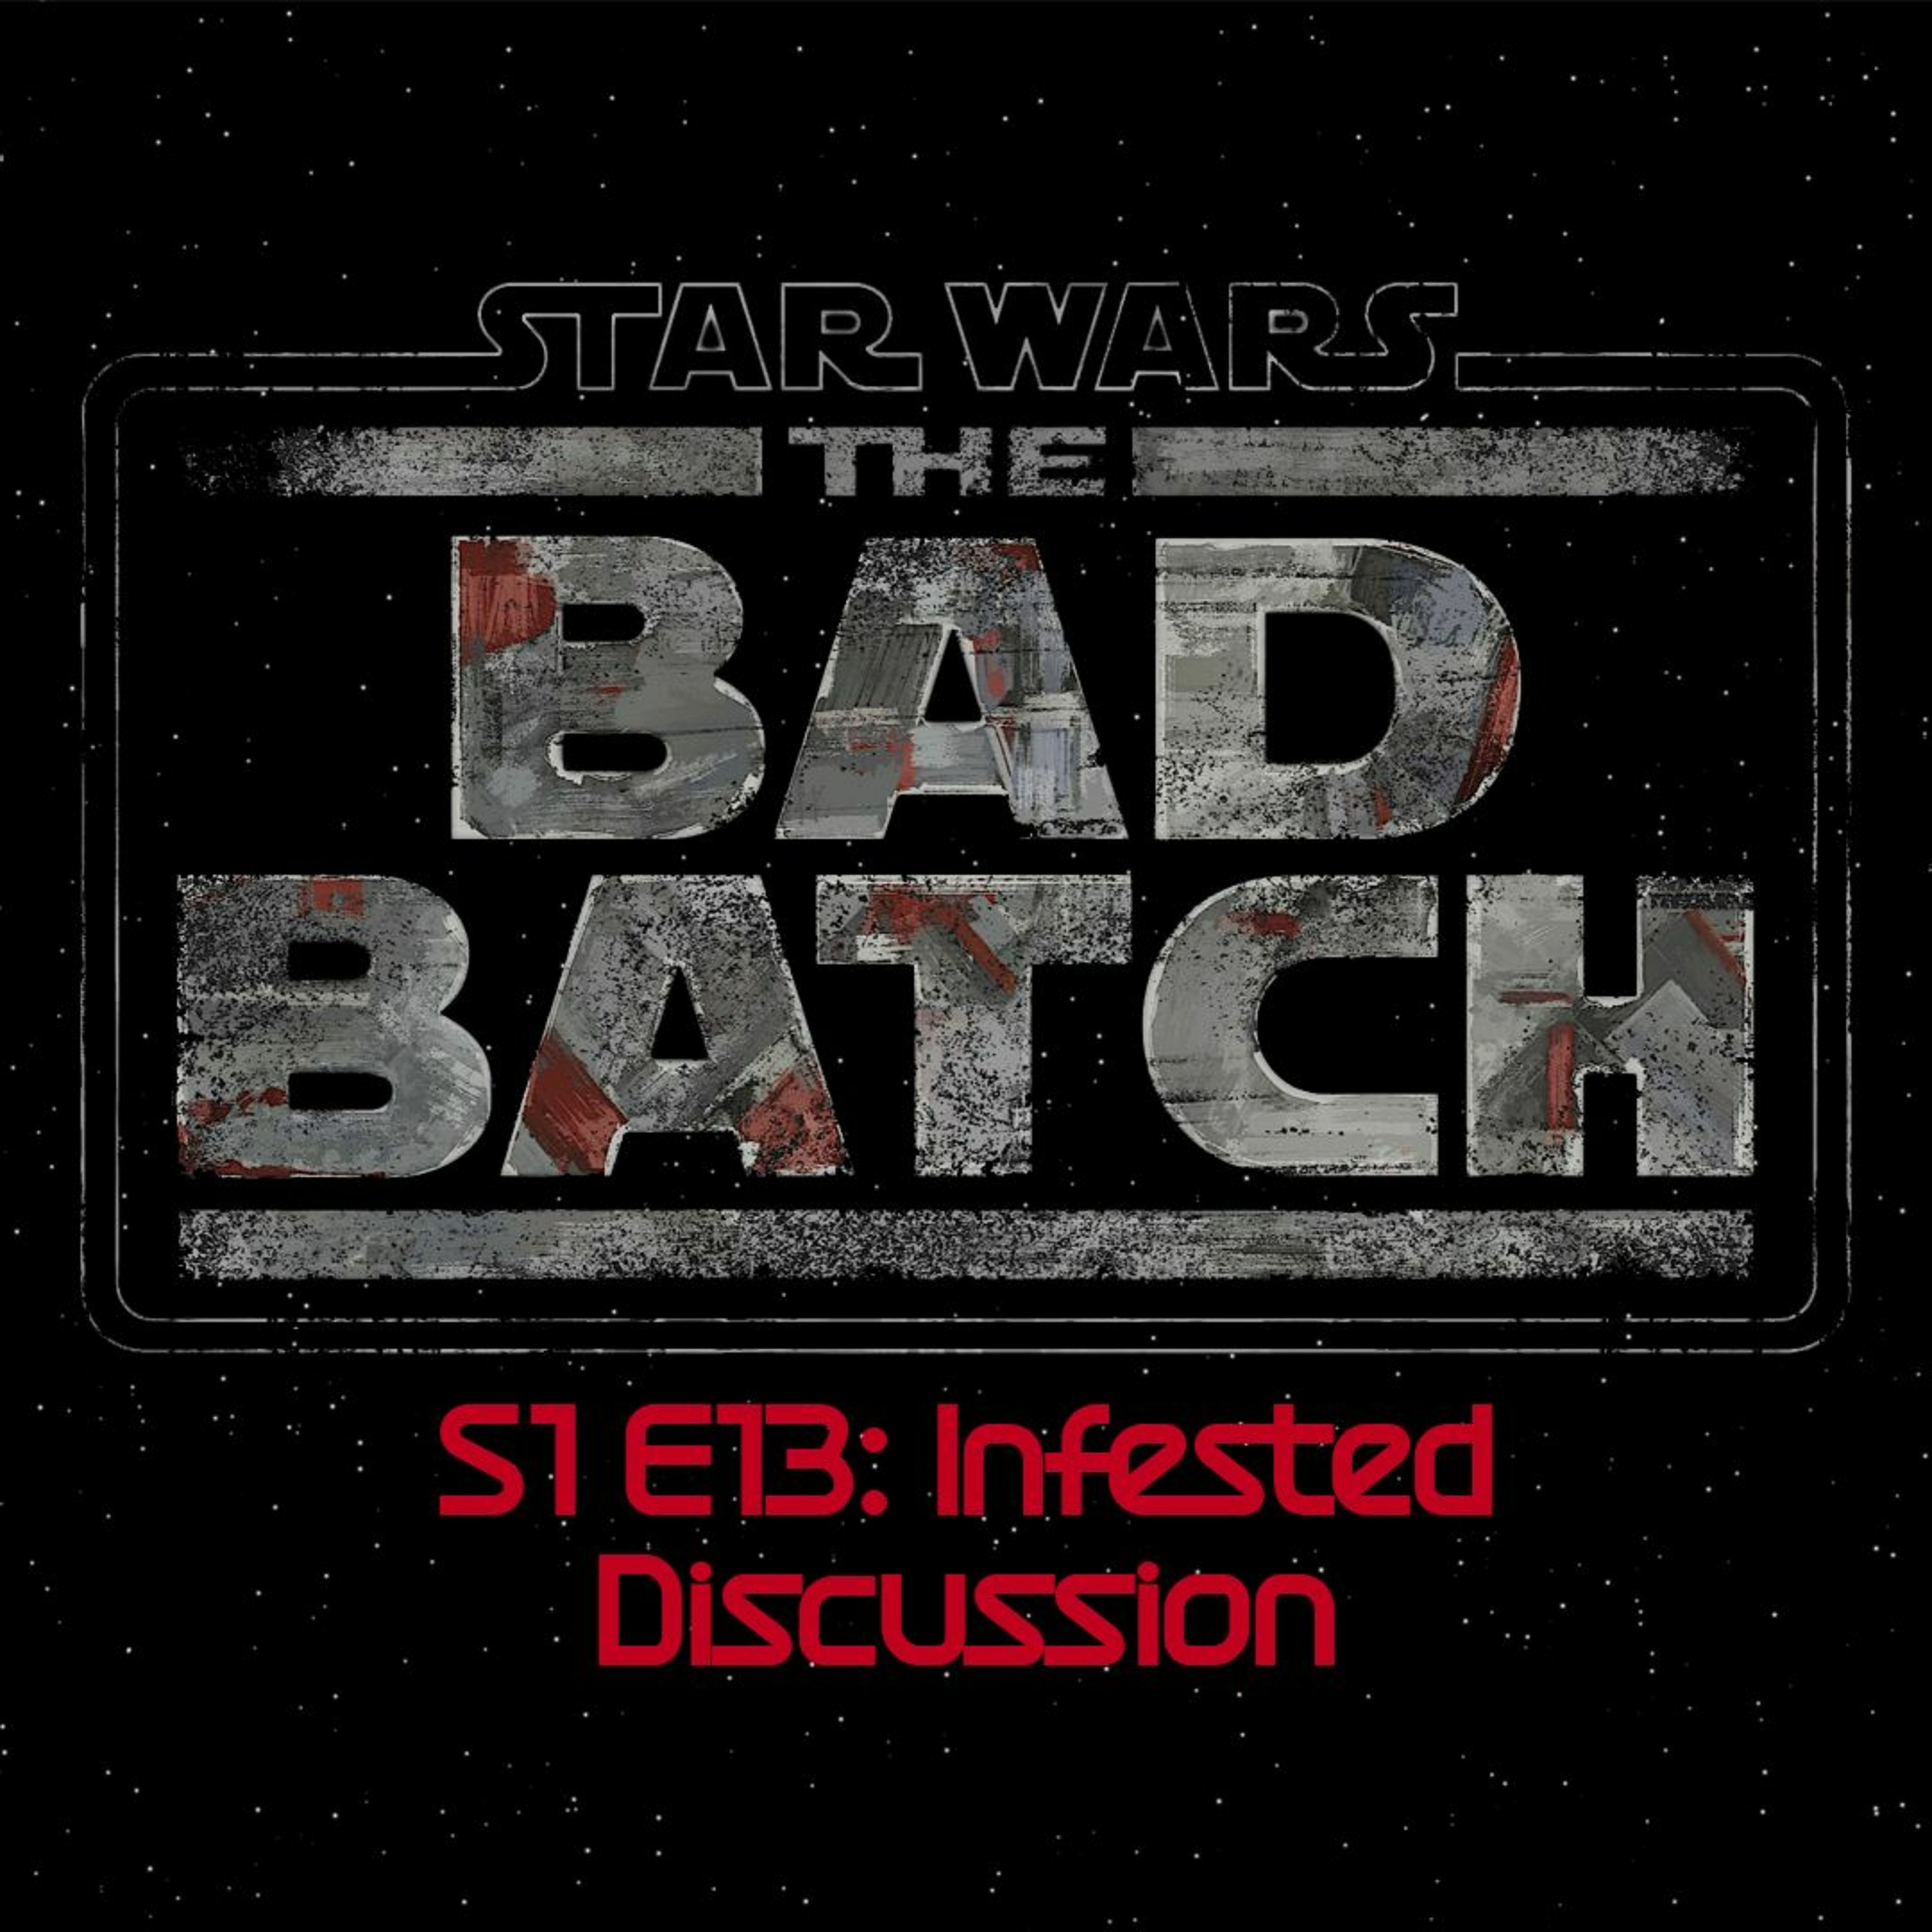 The Bad Batch S1E13: Infested